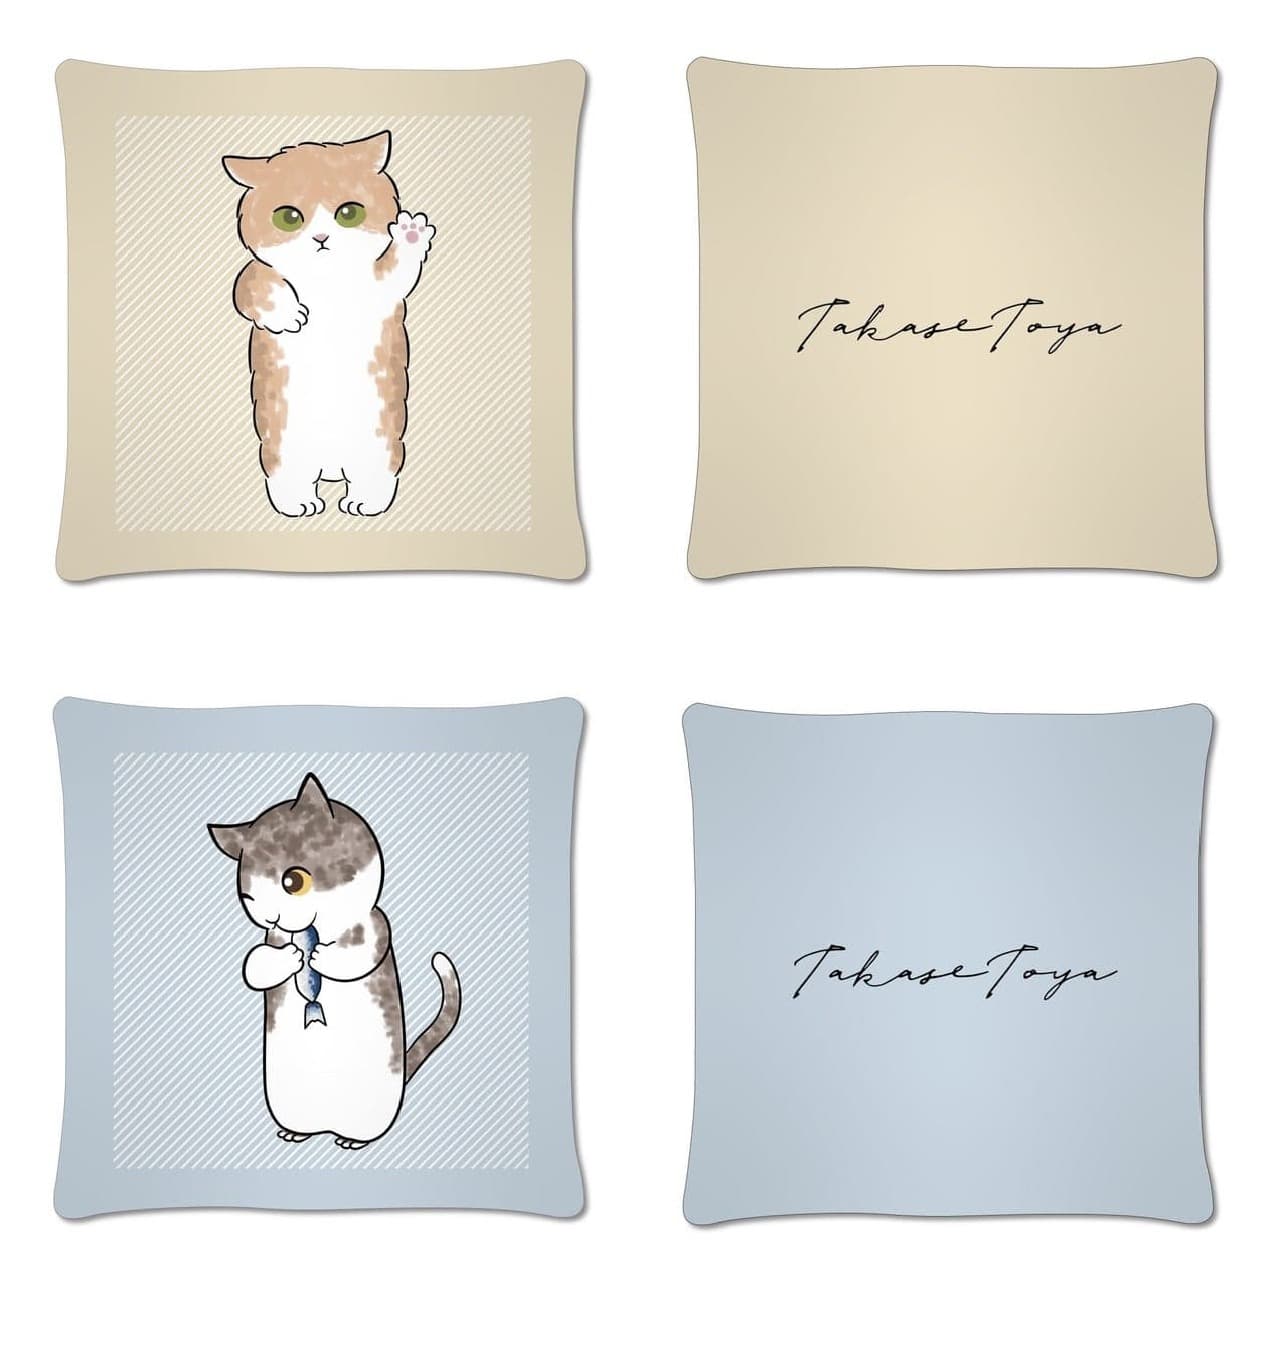 Village Vanguard and Tsunoya Takase collaborate! Limited-edition goods featuring his beloved cats, Moppu and Nameru, will be available for order from May 2.